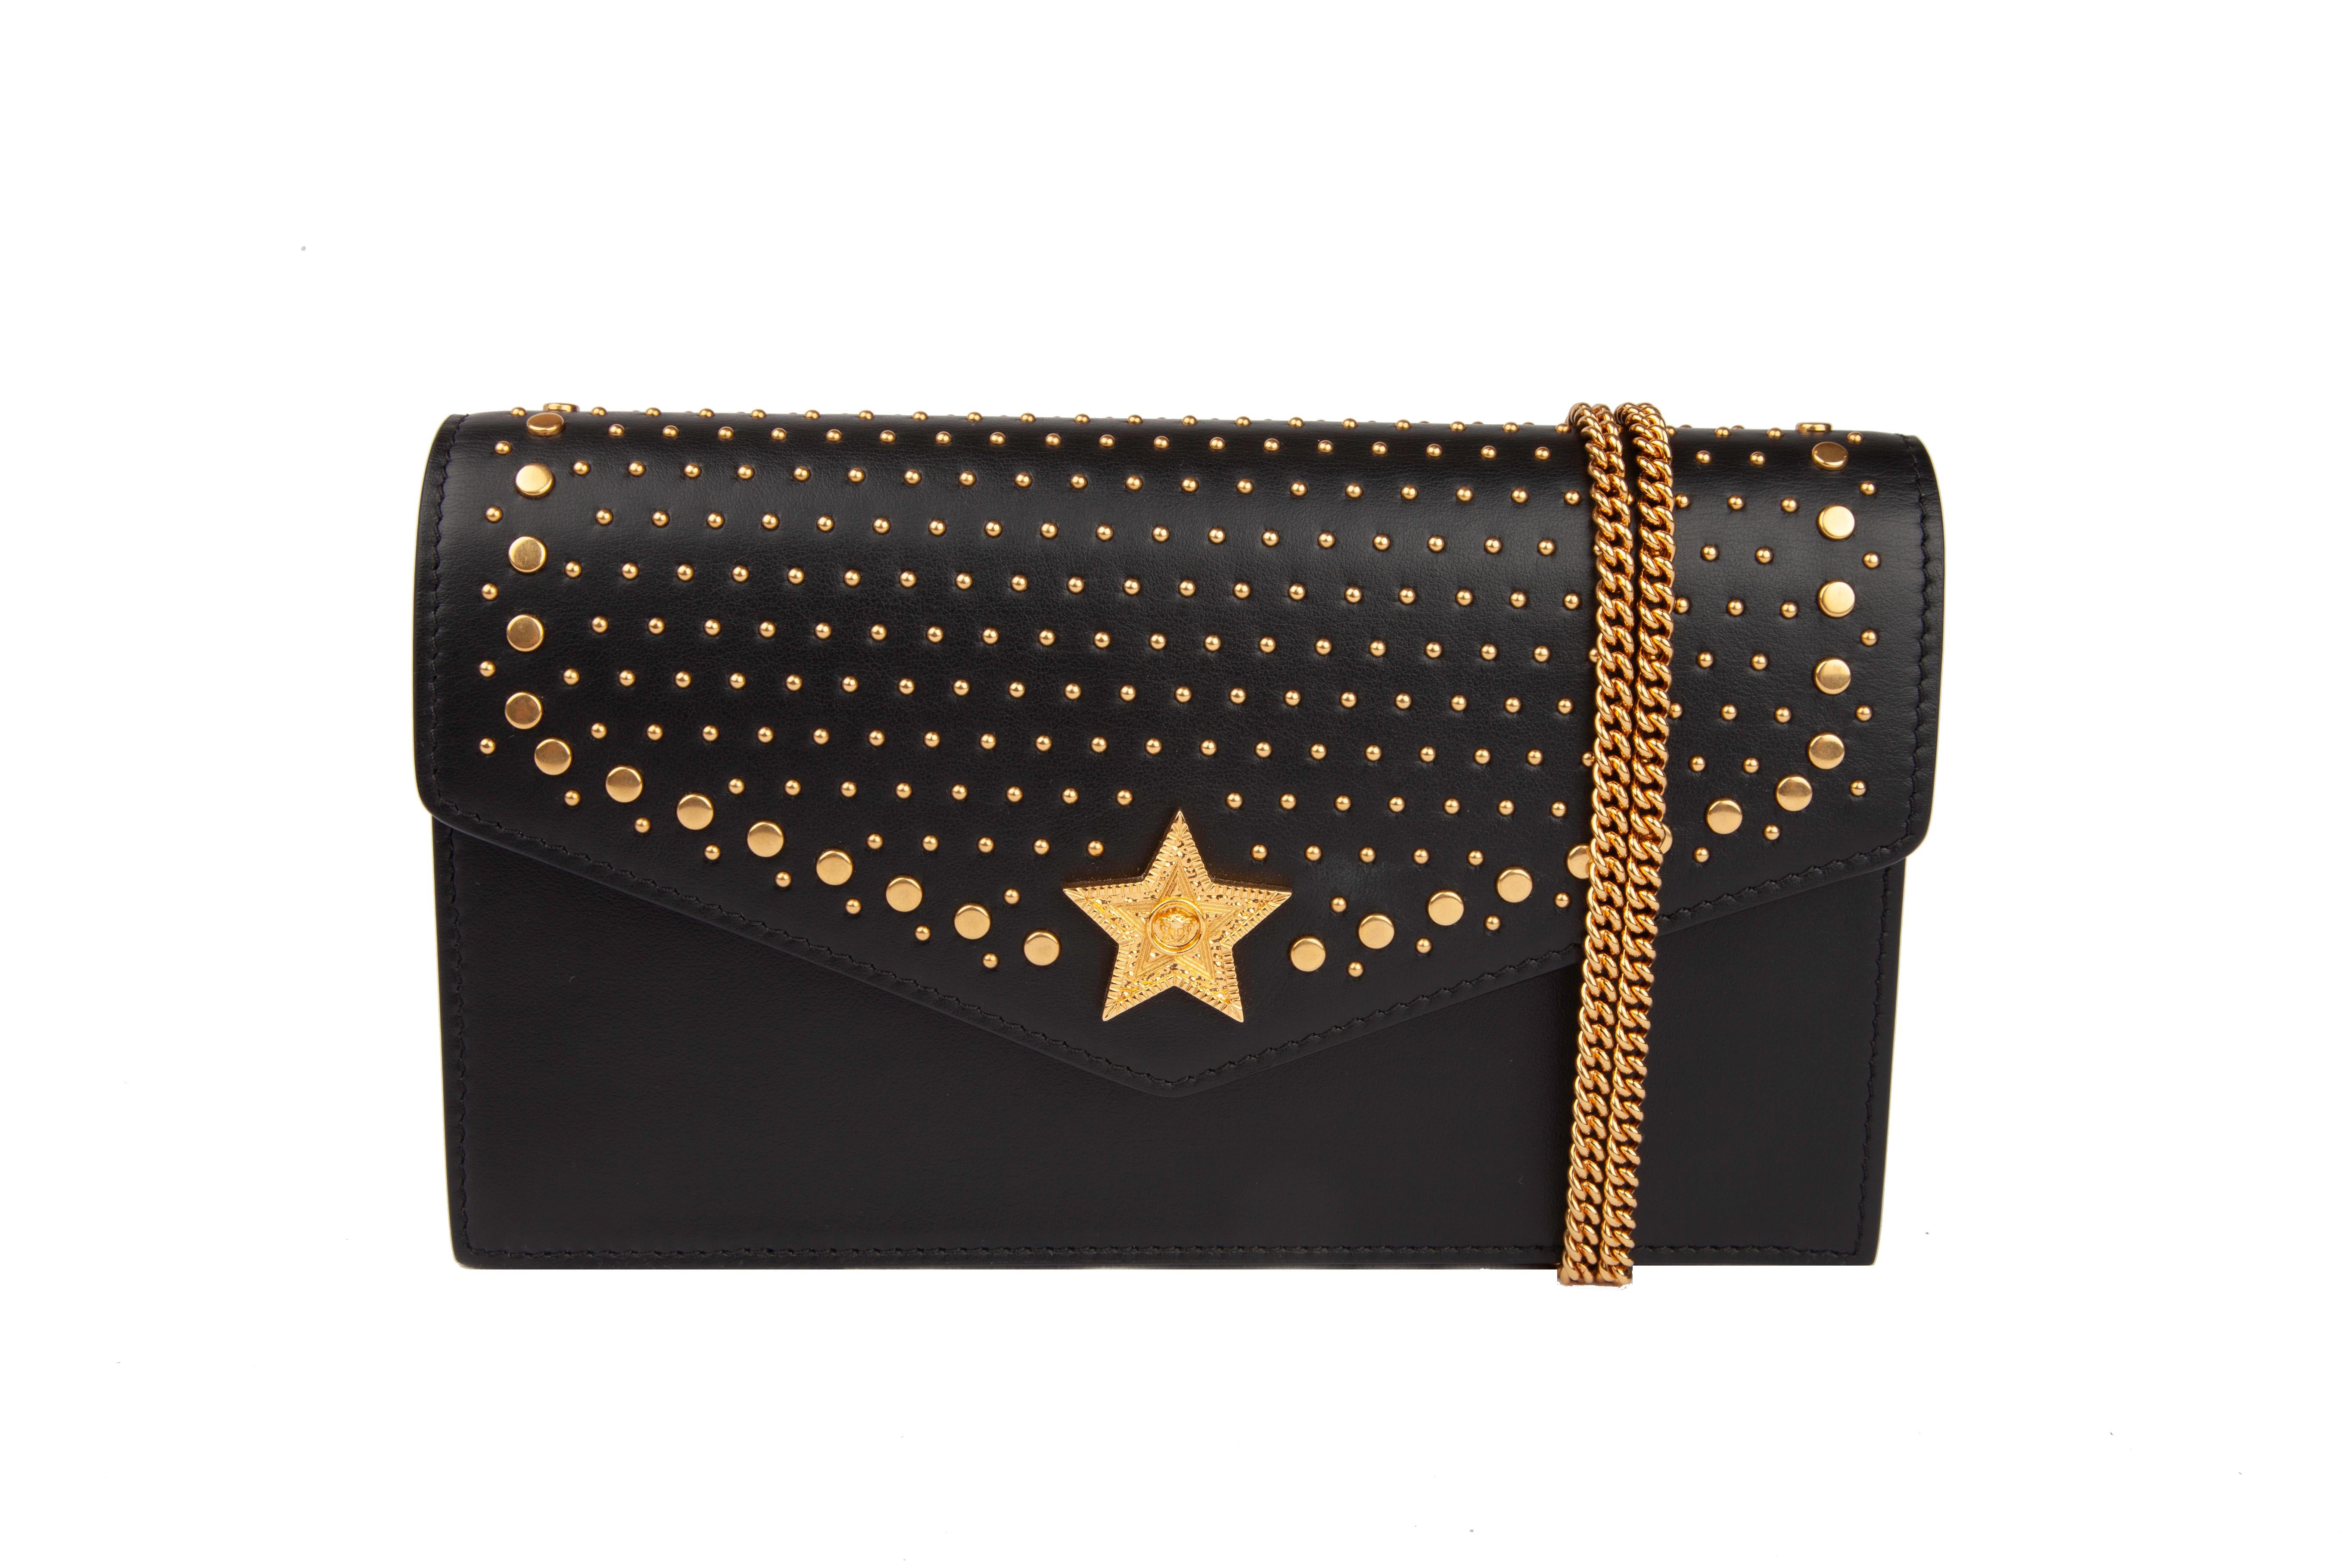 The elegant Icon clutch evening bag is revisited in a Western tone. The supple calf leather bag is enriched with all-over gold tone studwork and a star in the center. The flap over bag boasts a removable shoulder chain and a removable internal